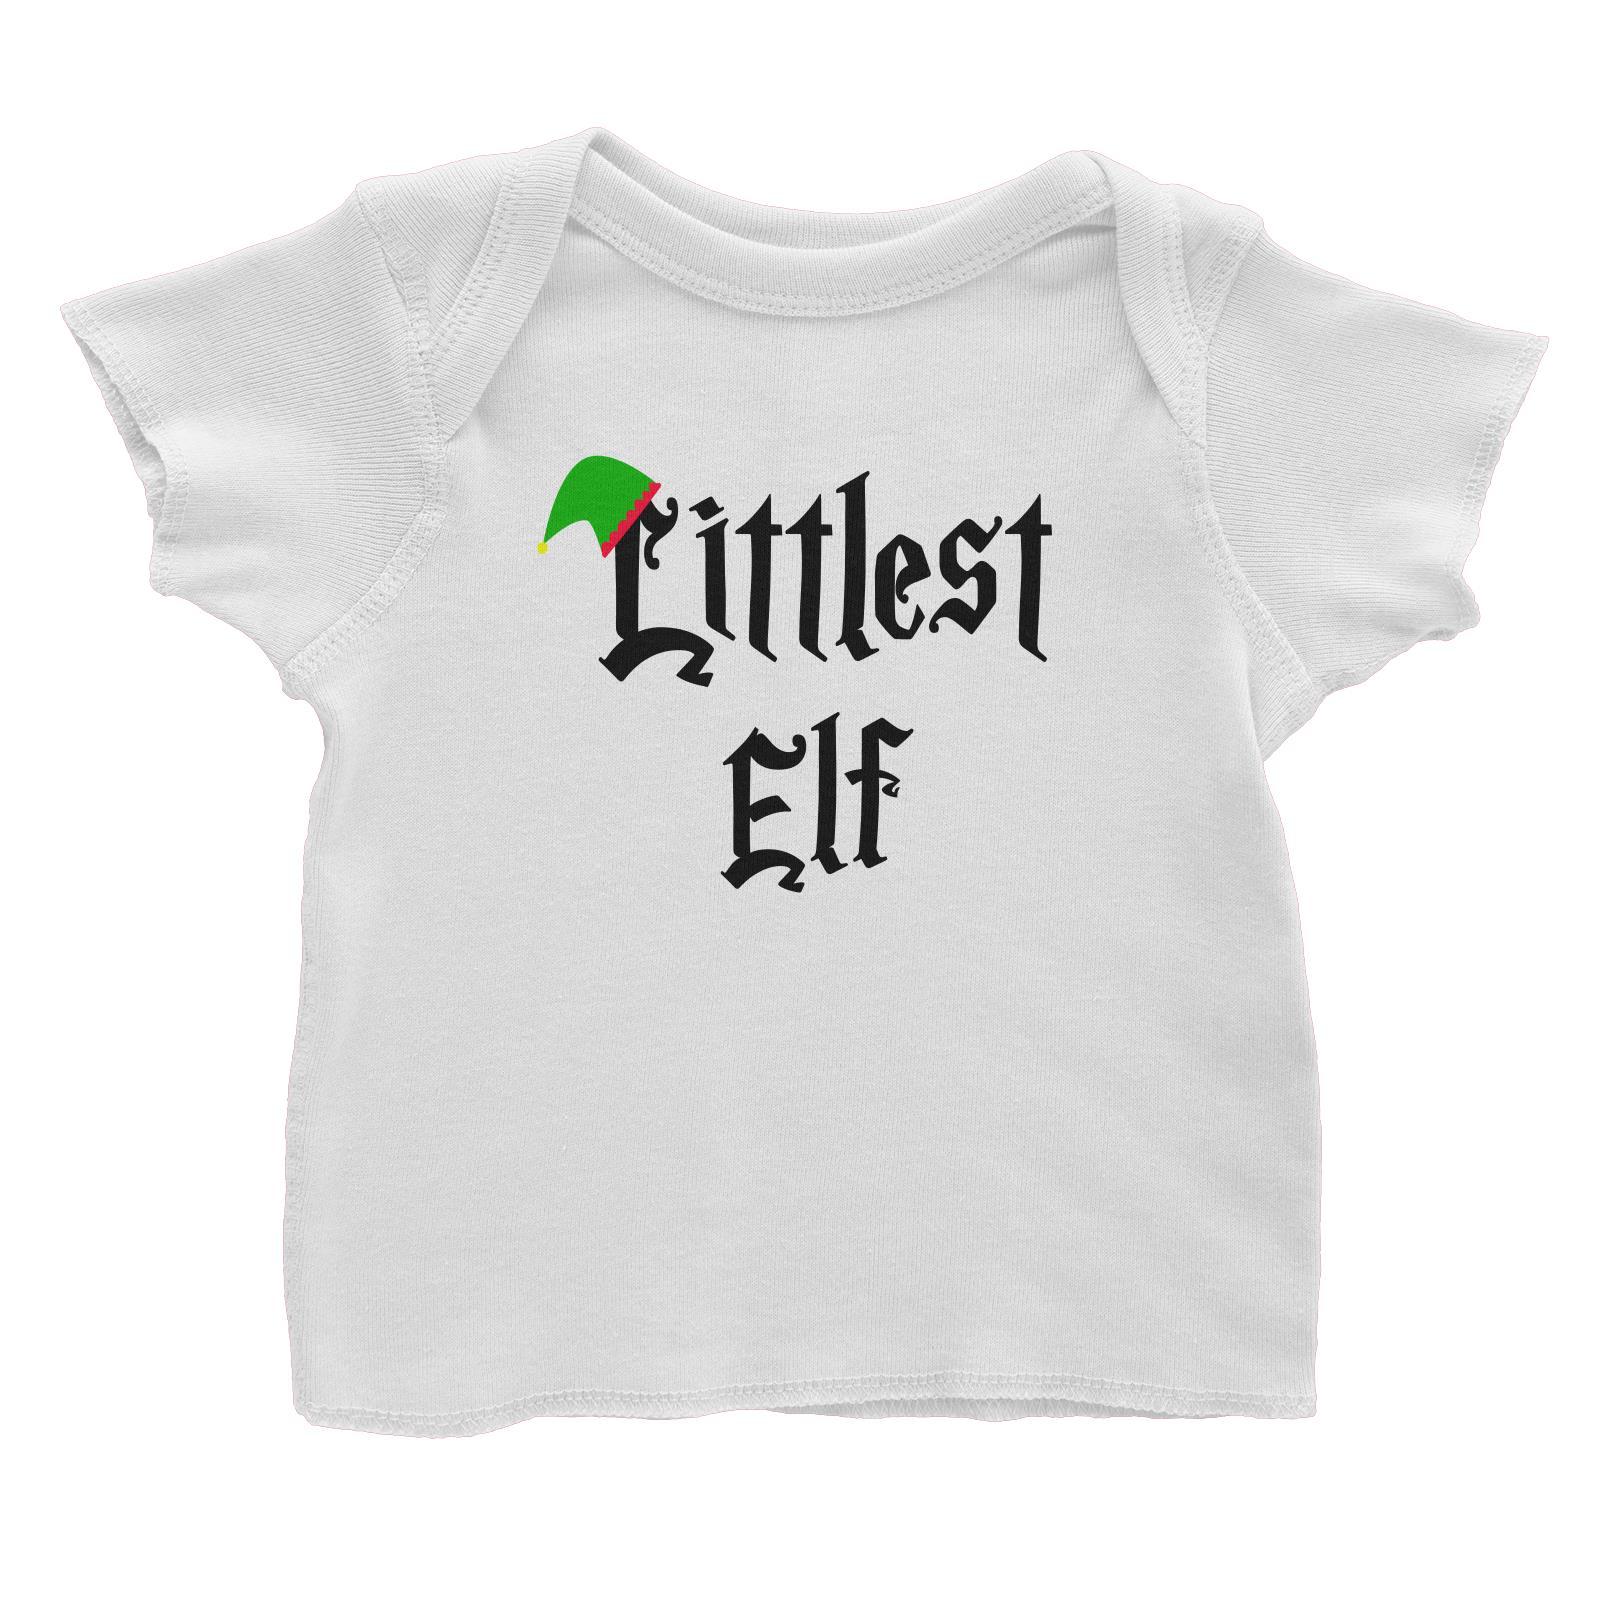 Littlest Elf With Hat Baby T-Shirt Christmas Matching Family